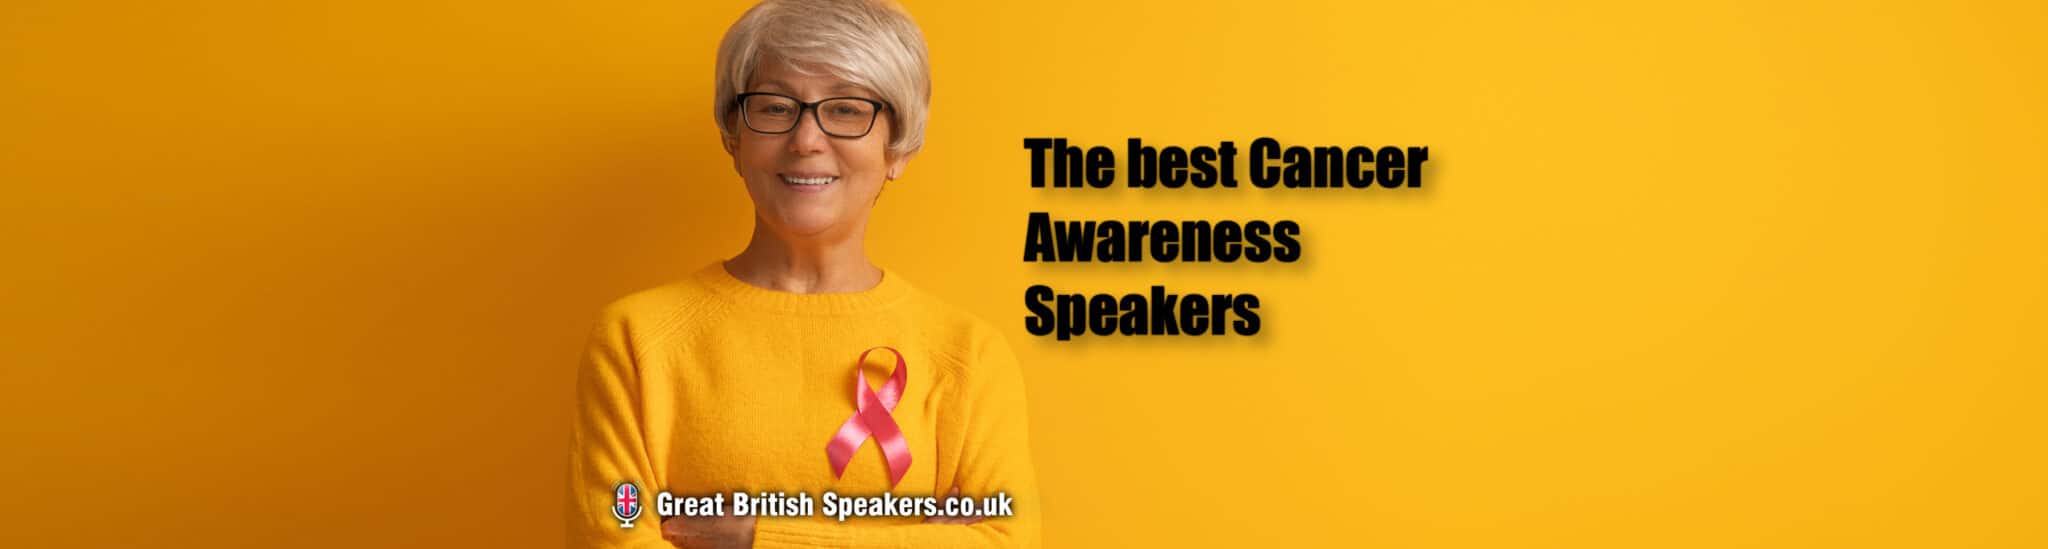 Book the best cancer awareness speakers at agent Great British Speakers